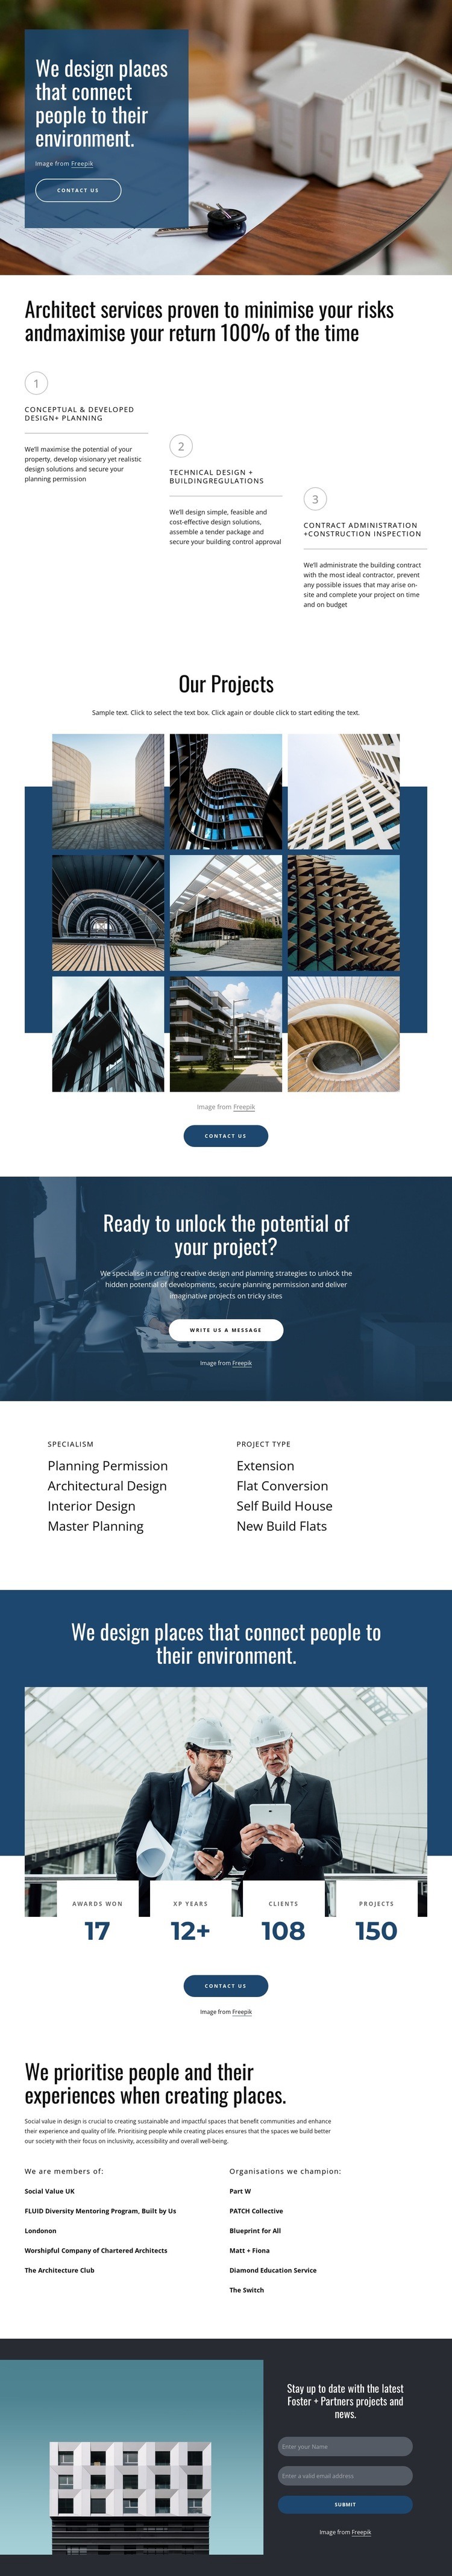 We design amazing projects Web Page Design